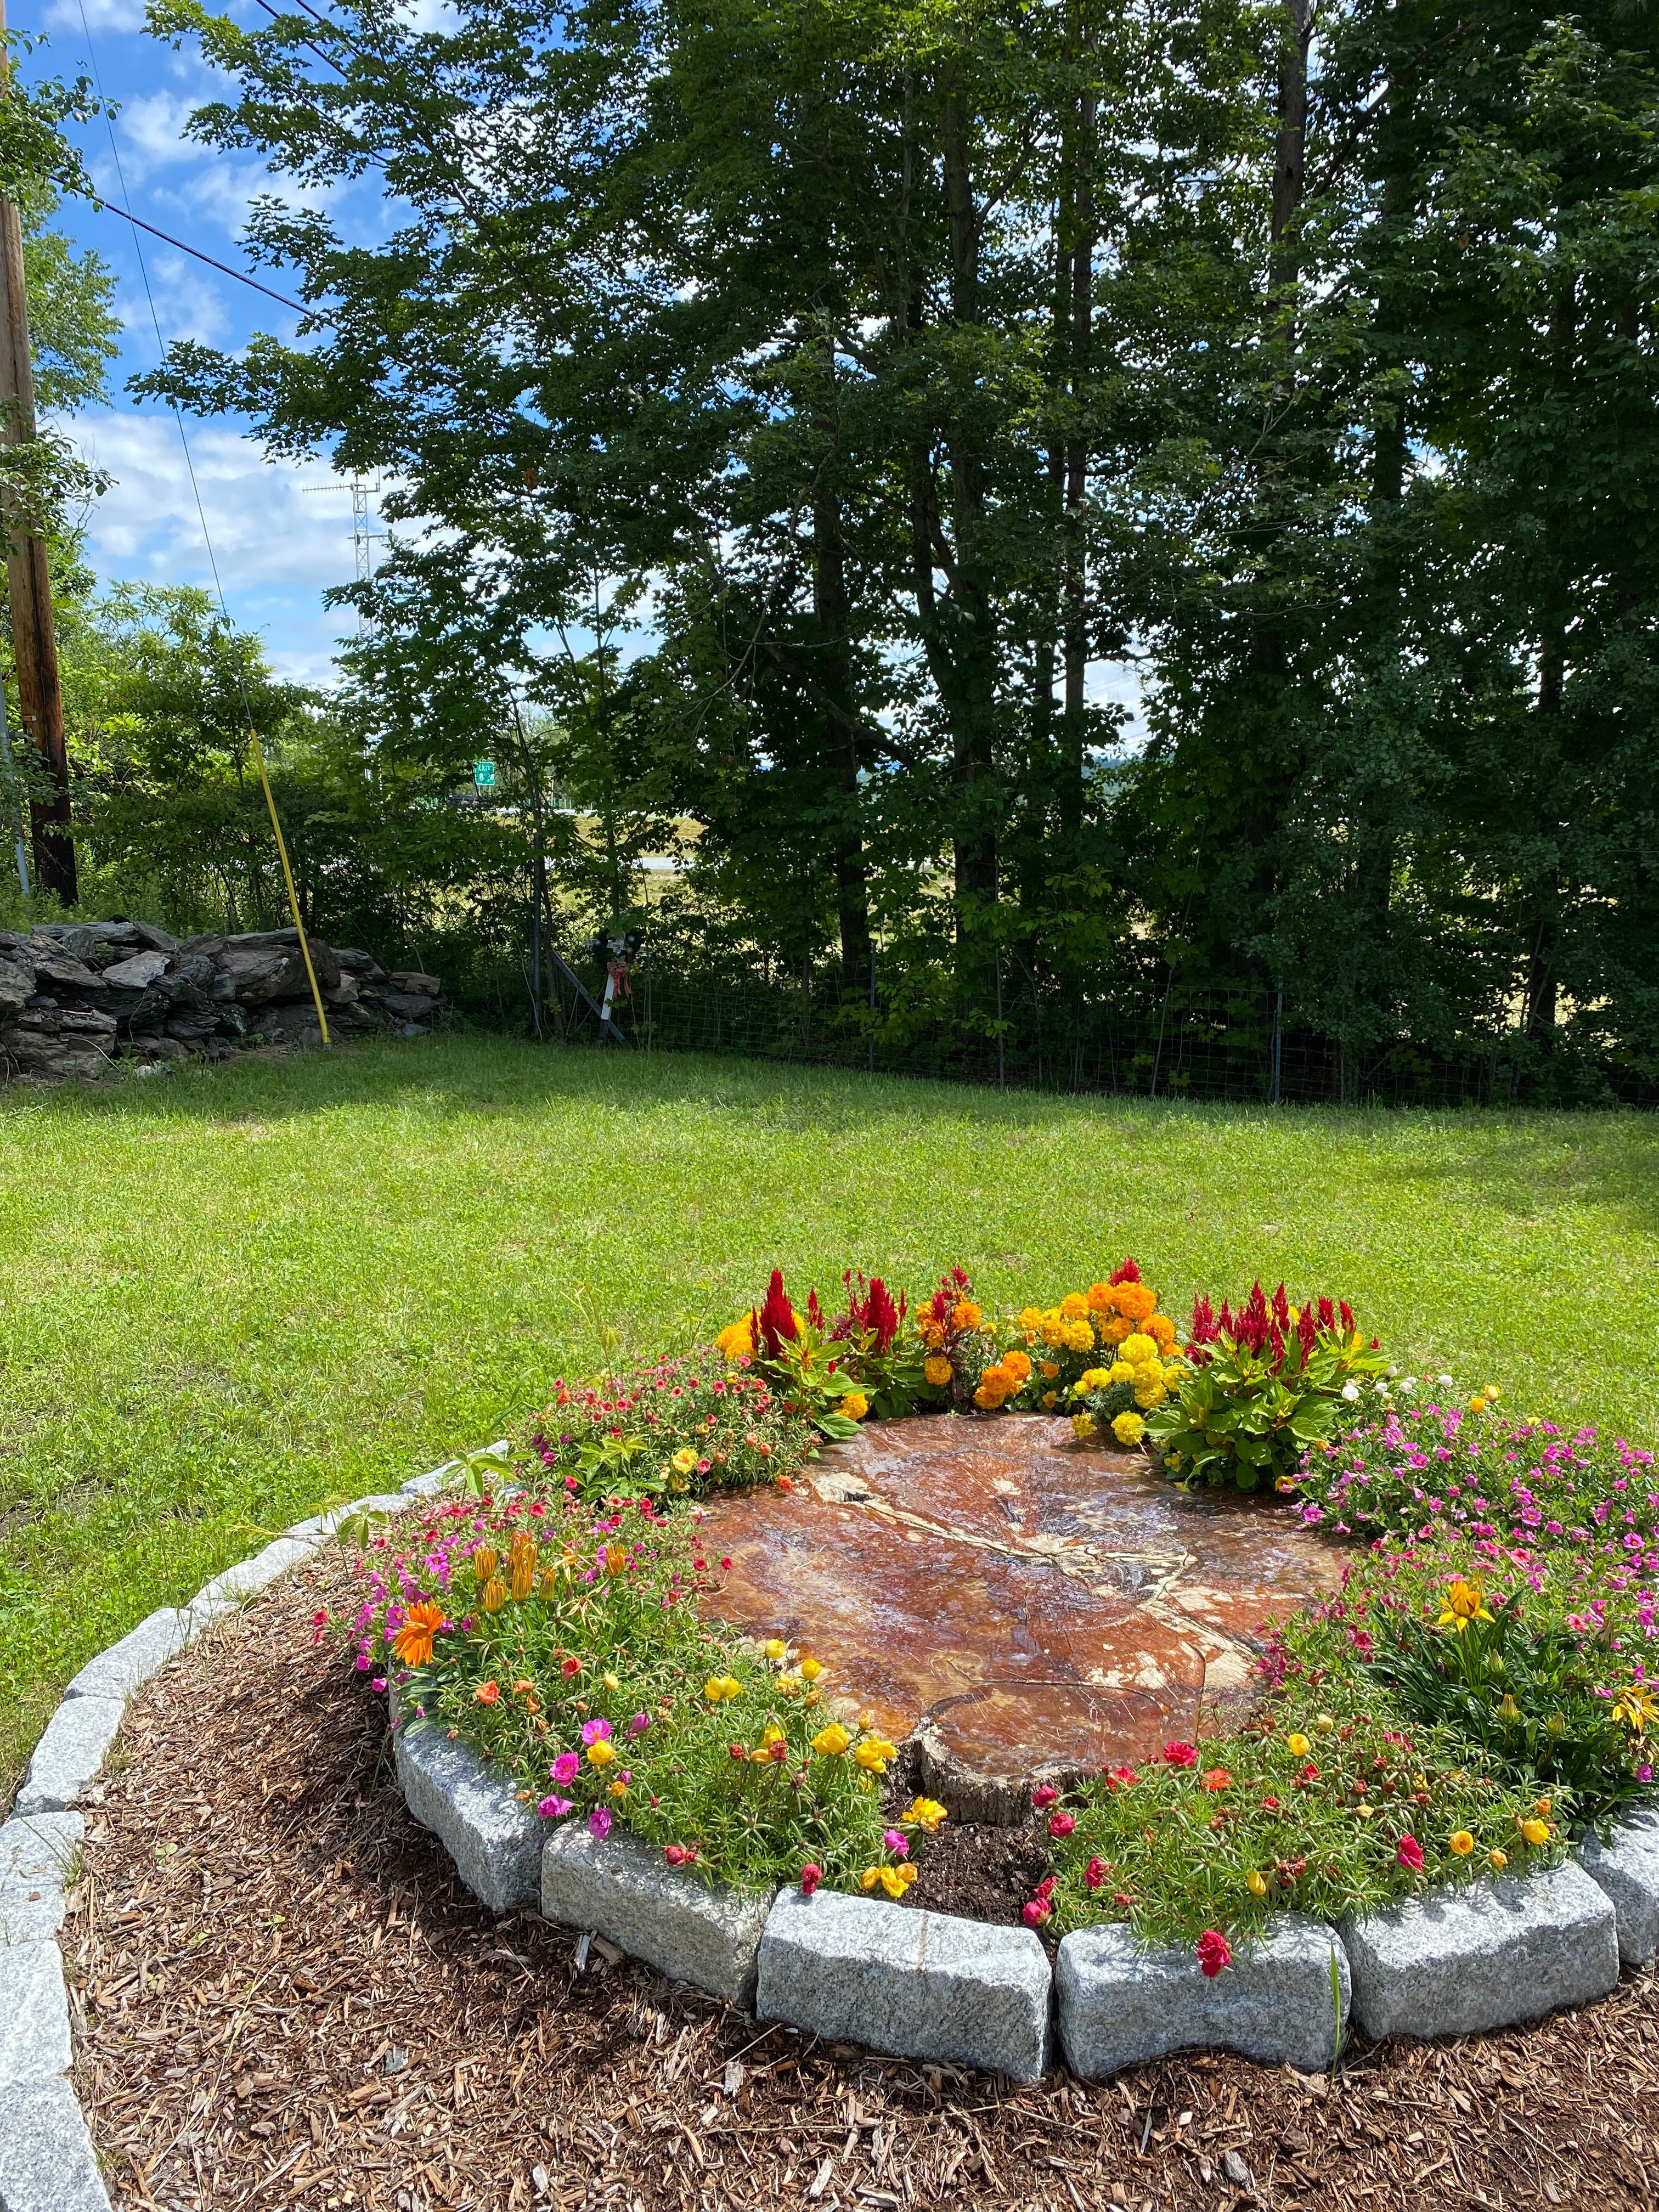 A tree stump surrounded by a ring of flowers and two rings of stones.